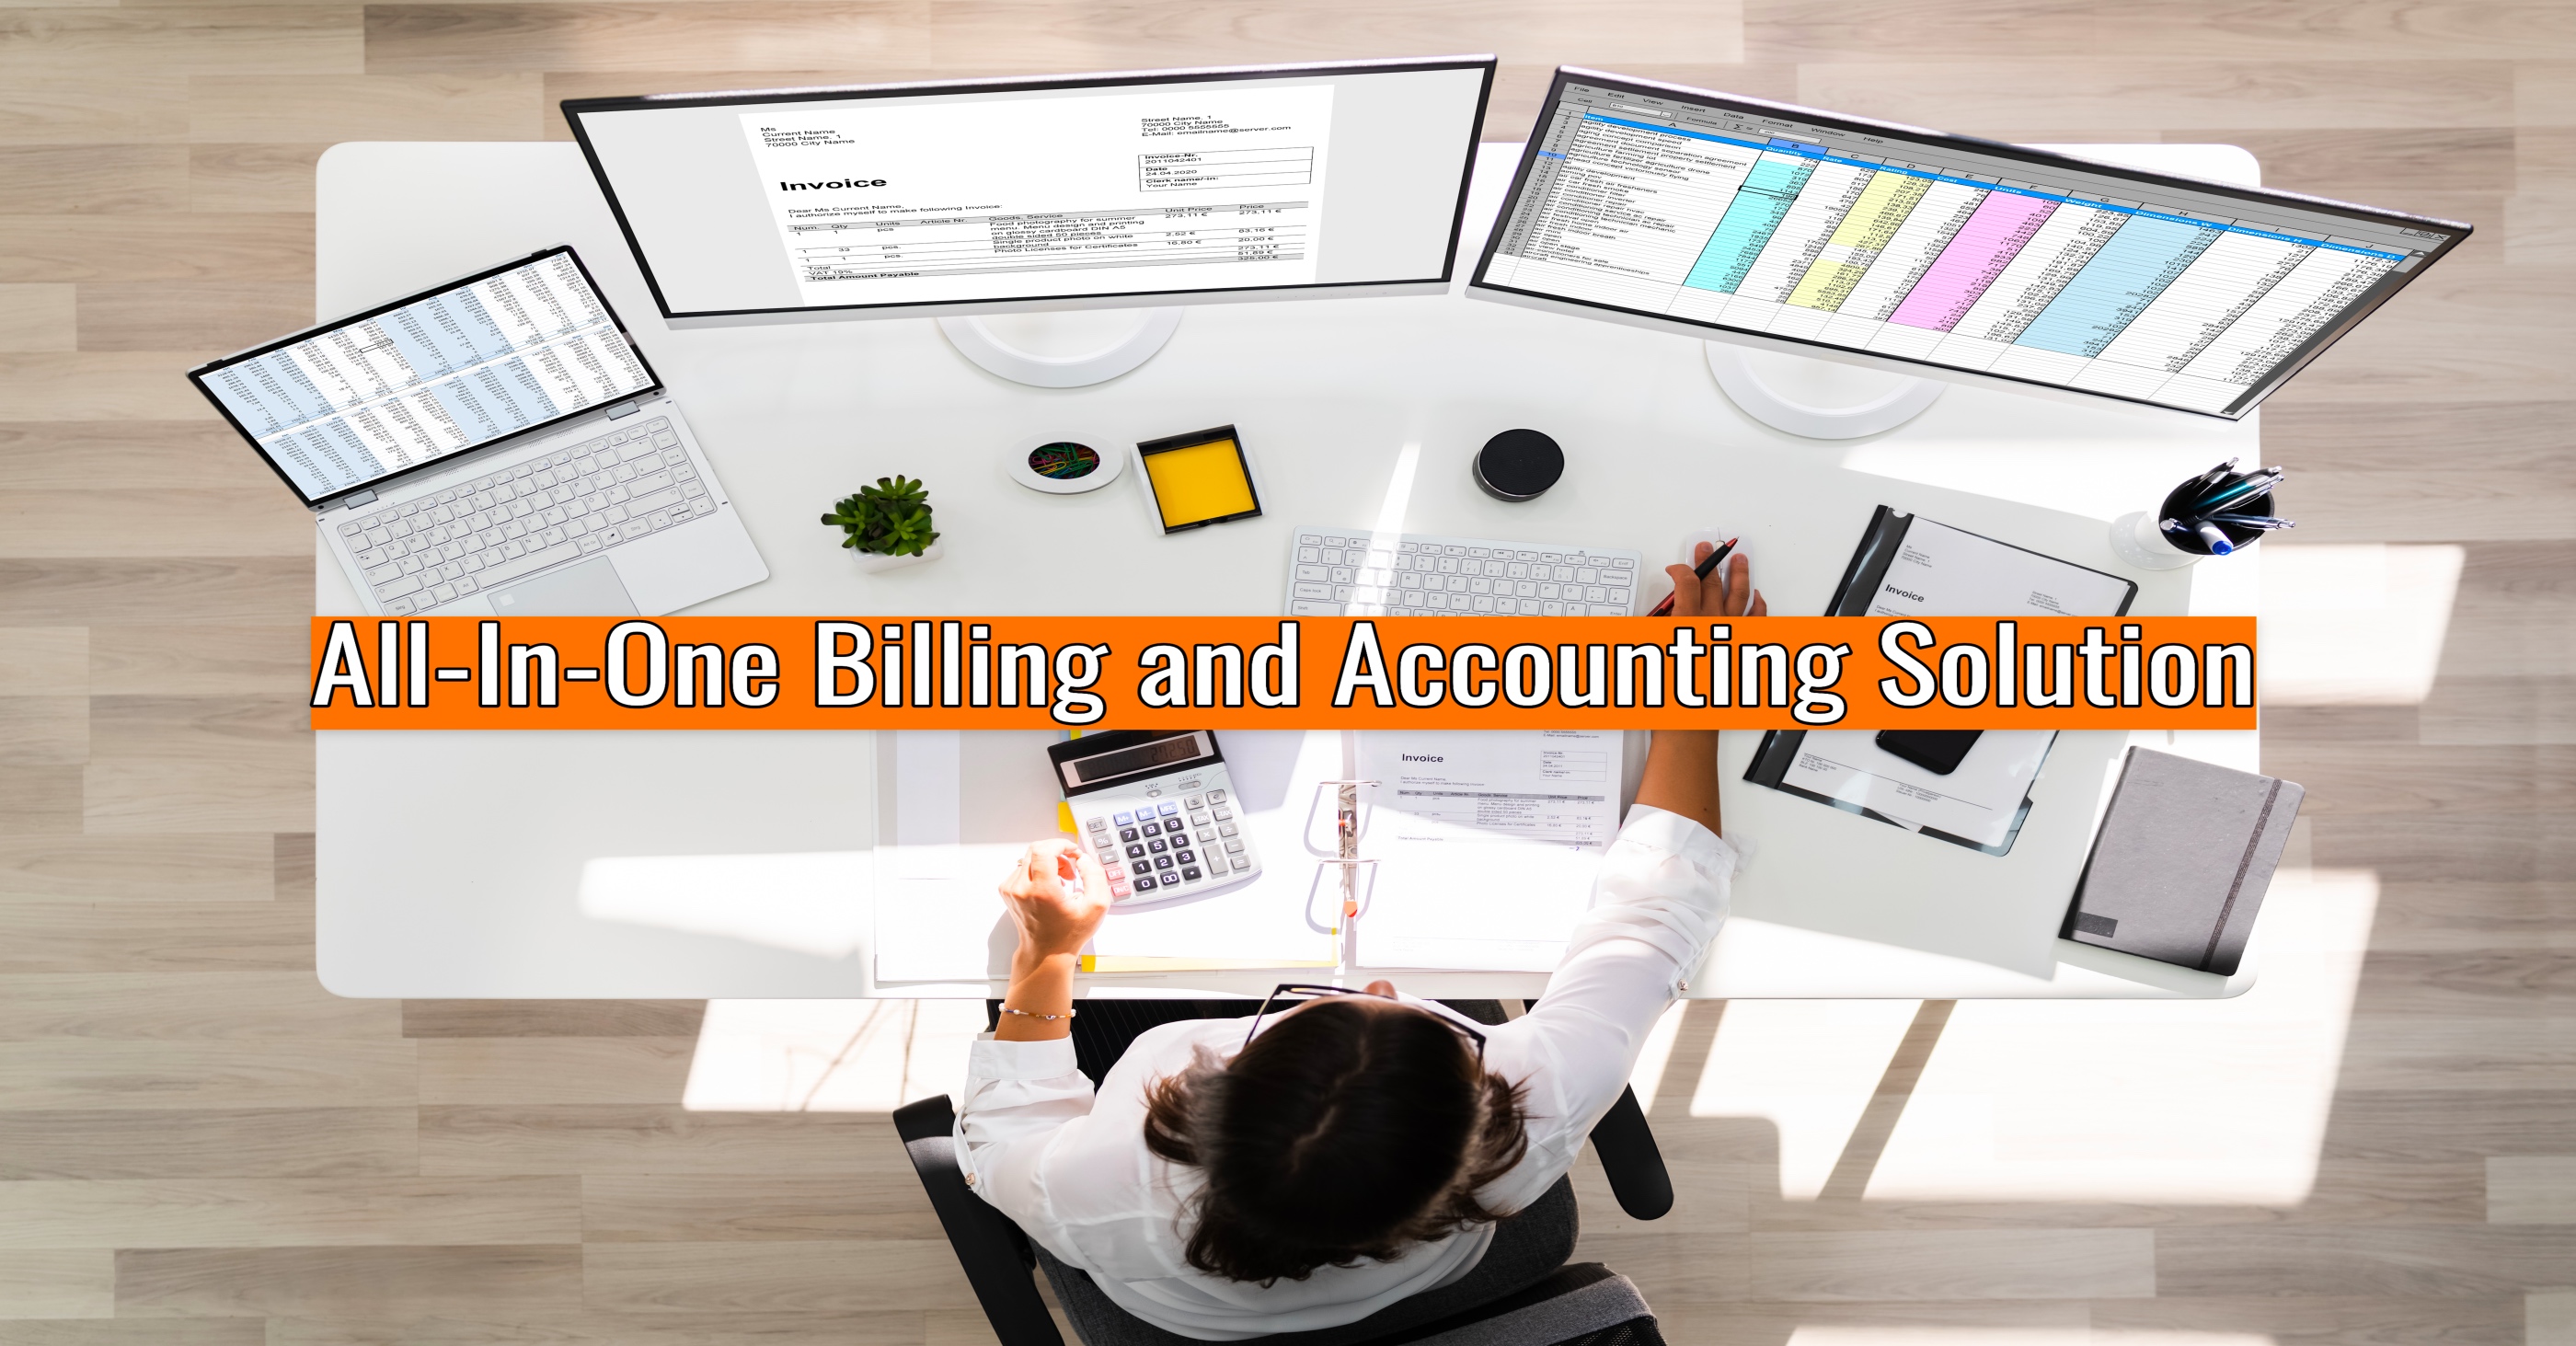 Billing and Accounting Solution - All-in-One Billing and Accounting Solution